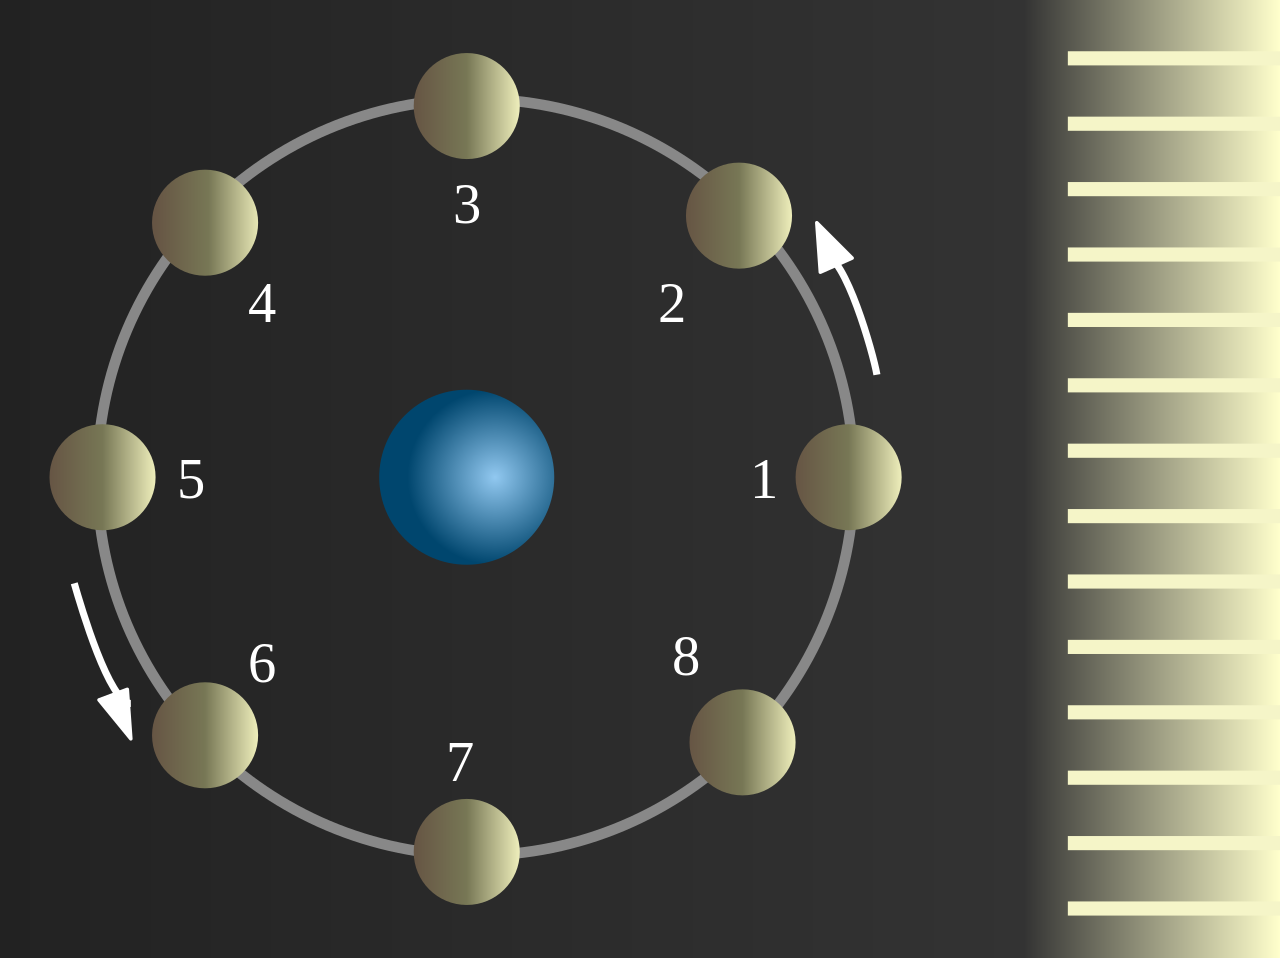 Illustration of a simplified solar system with eight orbiting bodies labeled 1 through 8 around a central blue sphere, and an adjacent measure or set of bars to the right side.